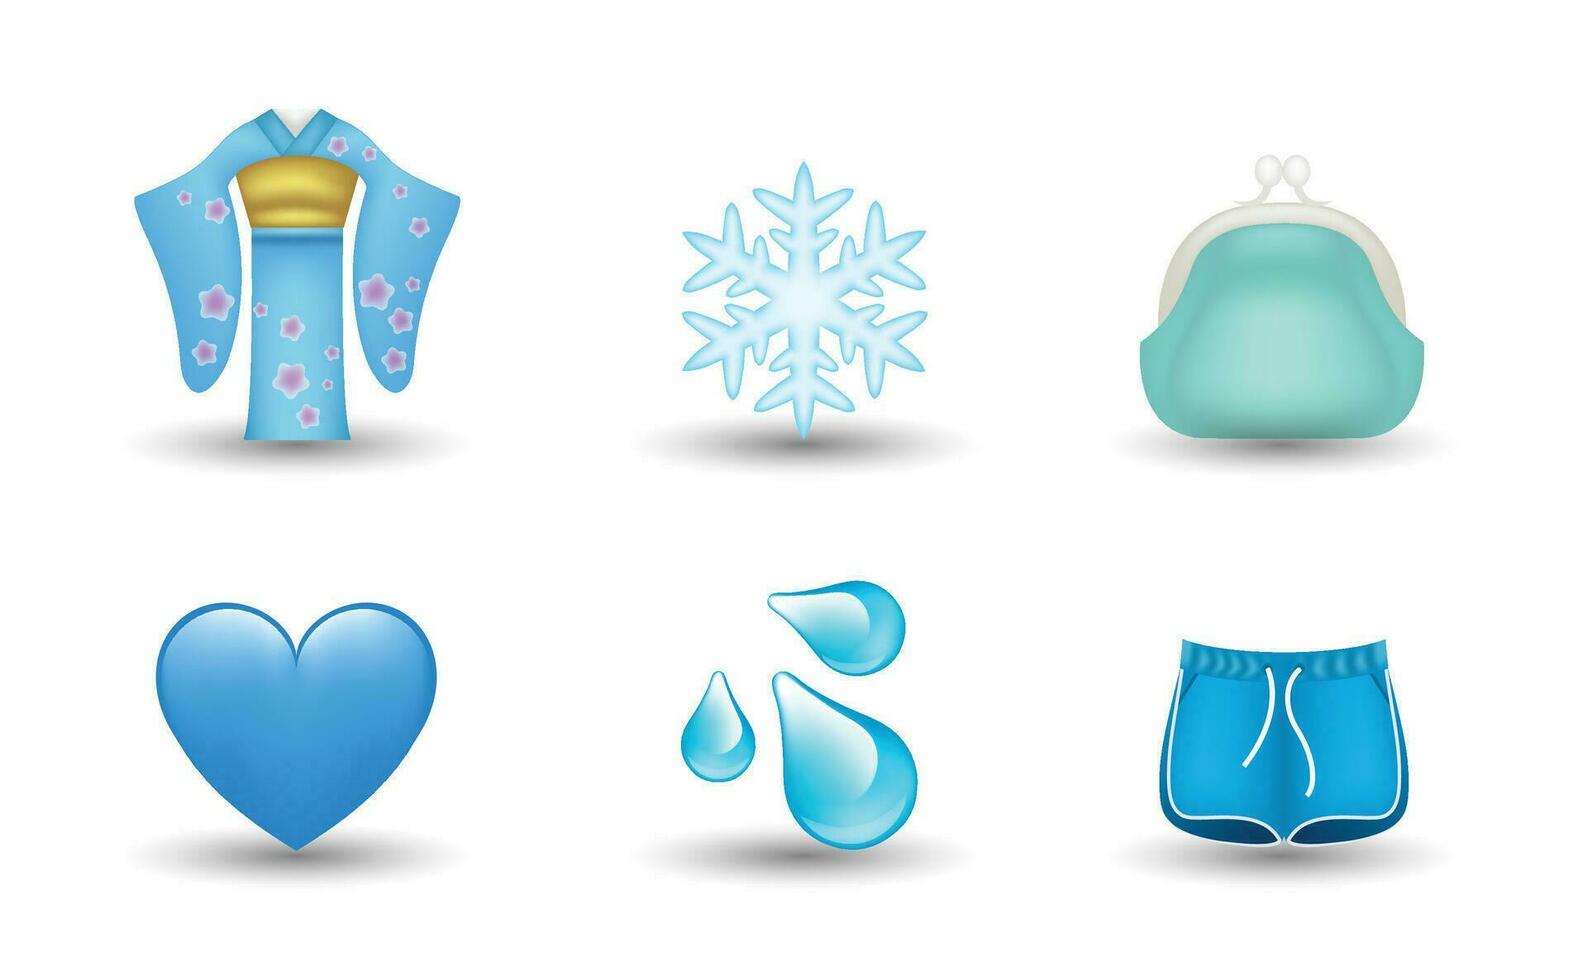 6 Emoticon isolated on White Background. Isolated Vector Illustration. Dress, snowflake, purse, blue heart, water drop, shorts vector emoji Illustration. Set of 3d objects Illustration in blue color.